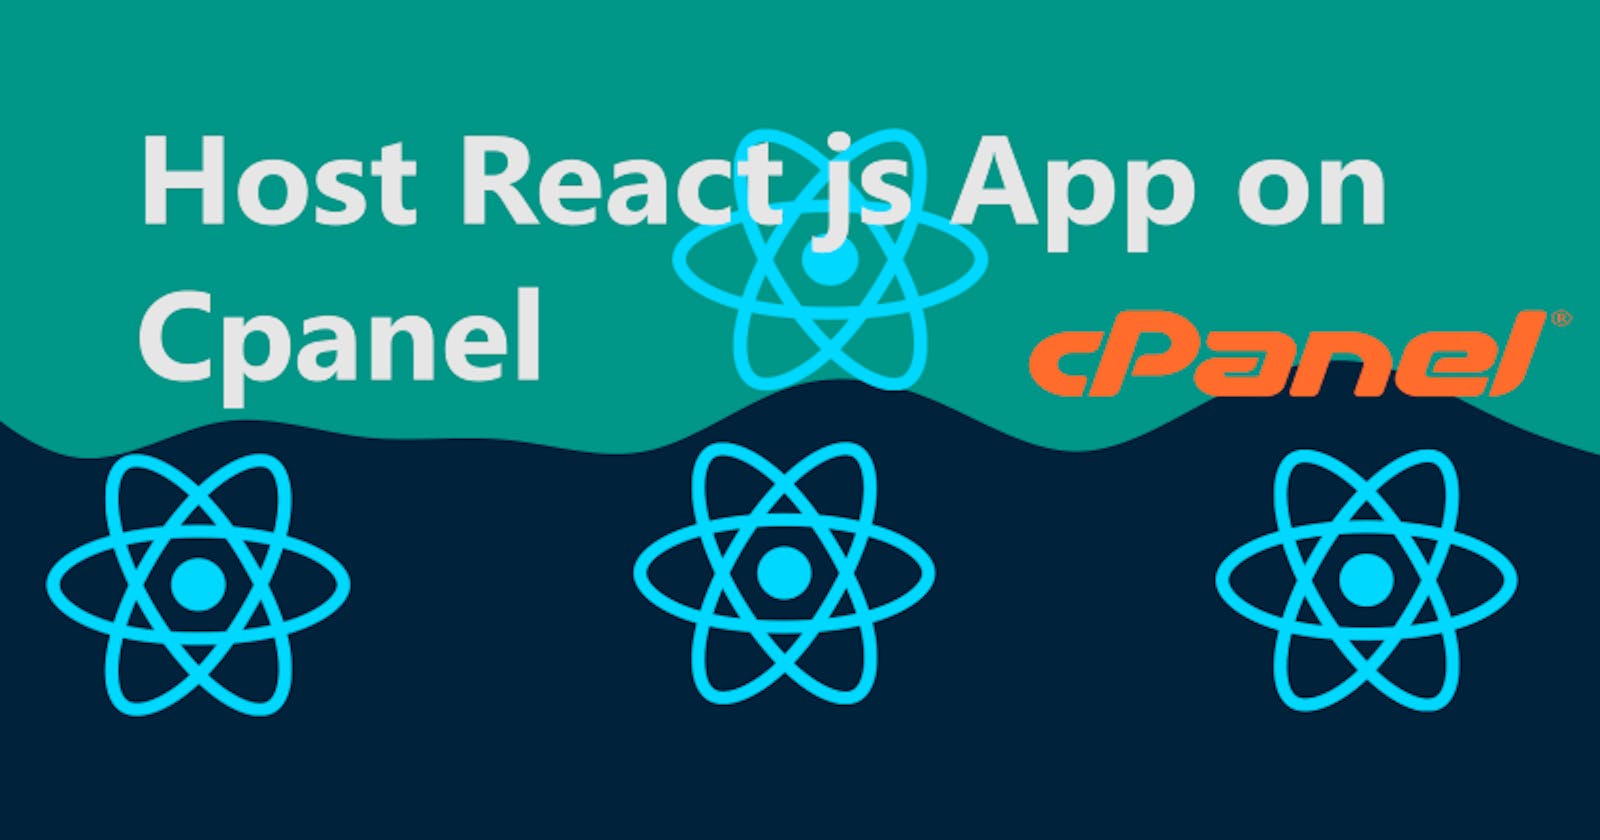 How to host react.js website app on cpanel